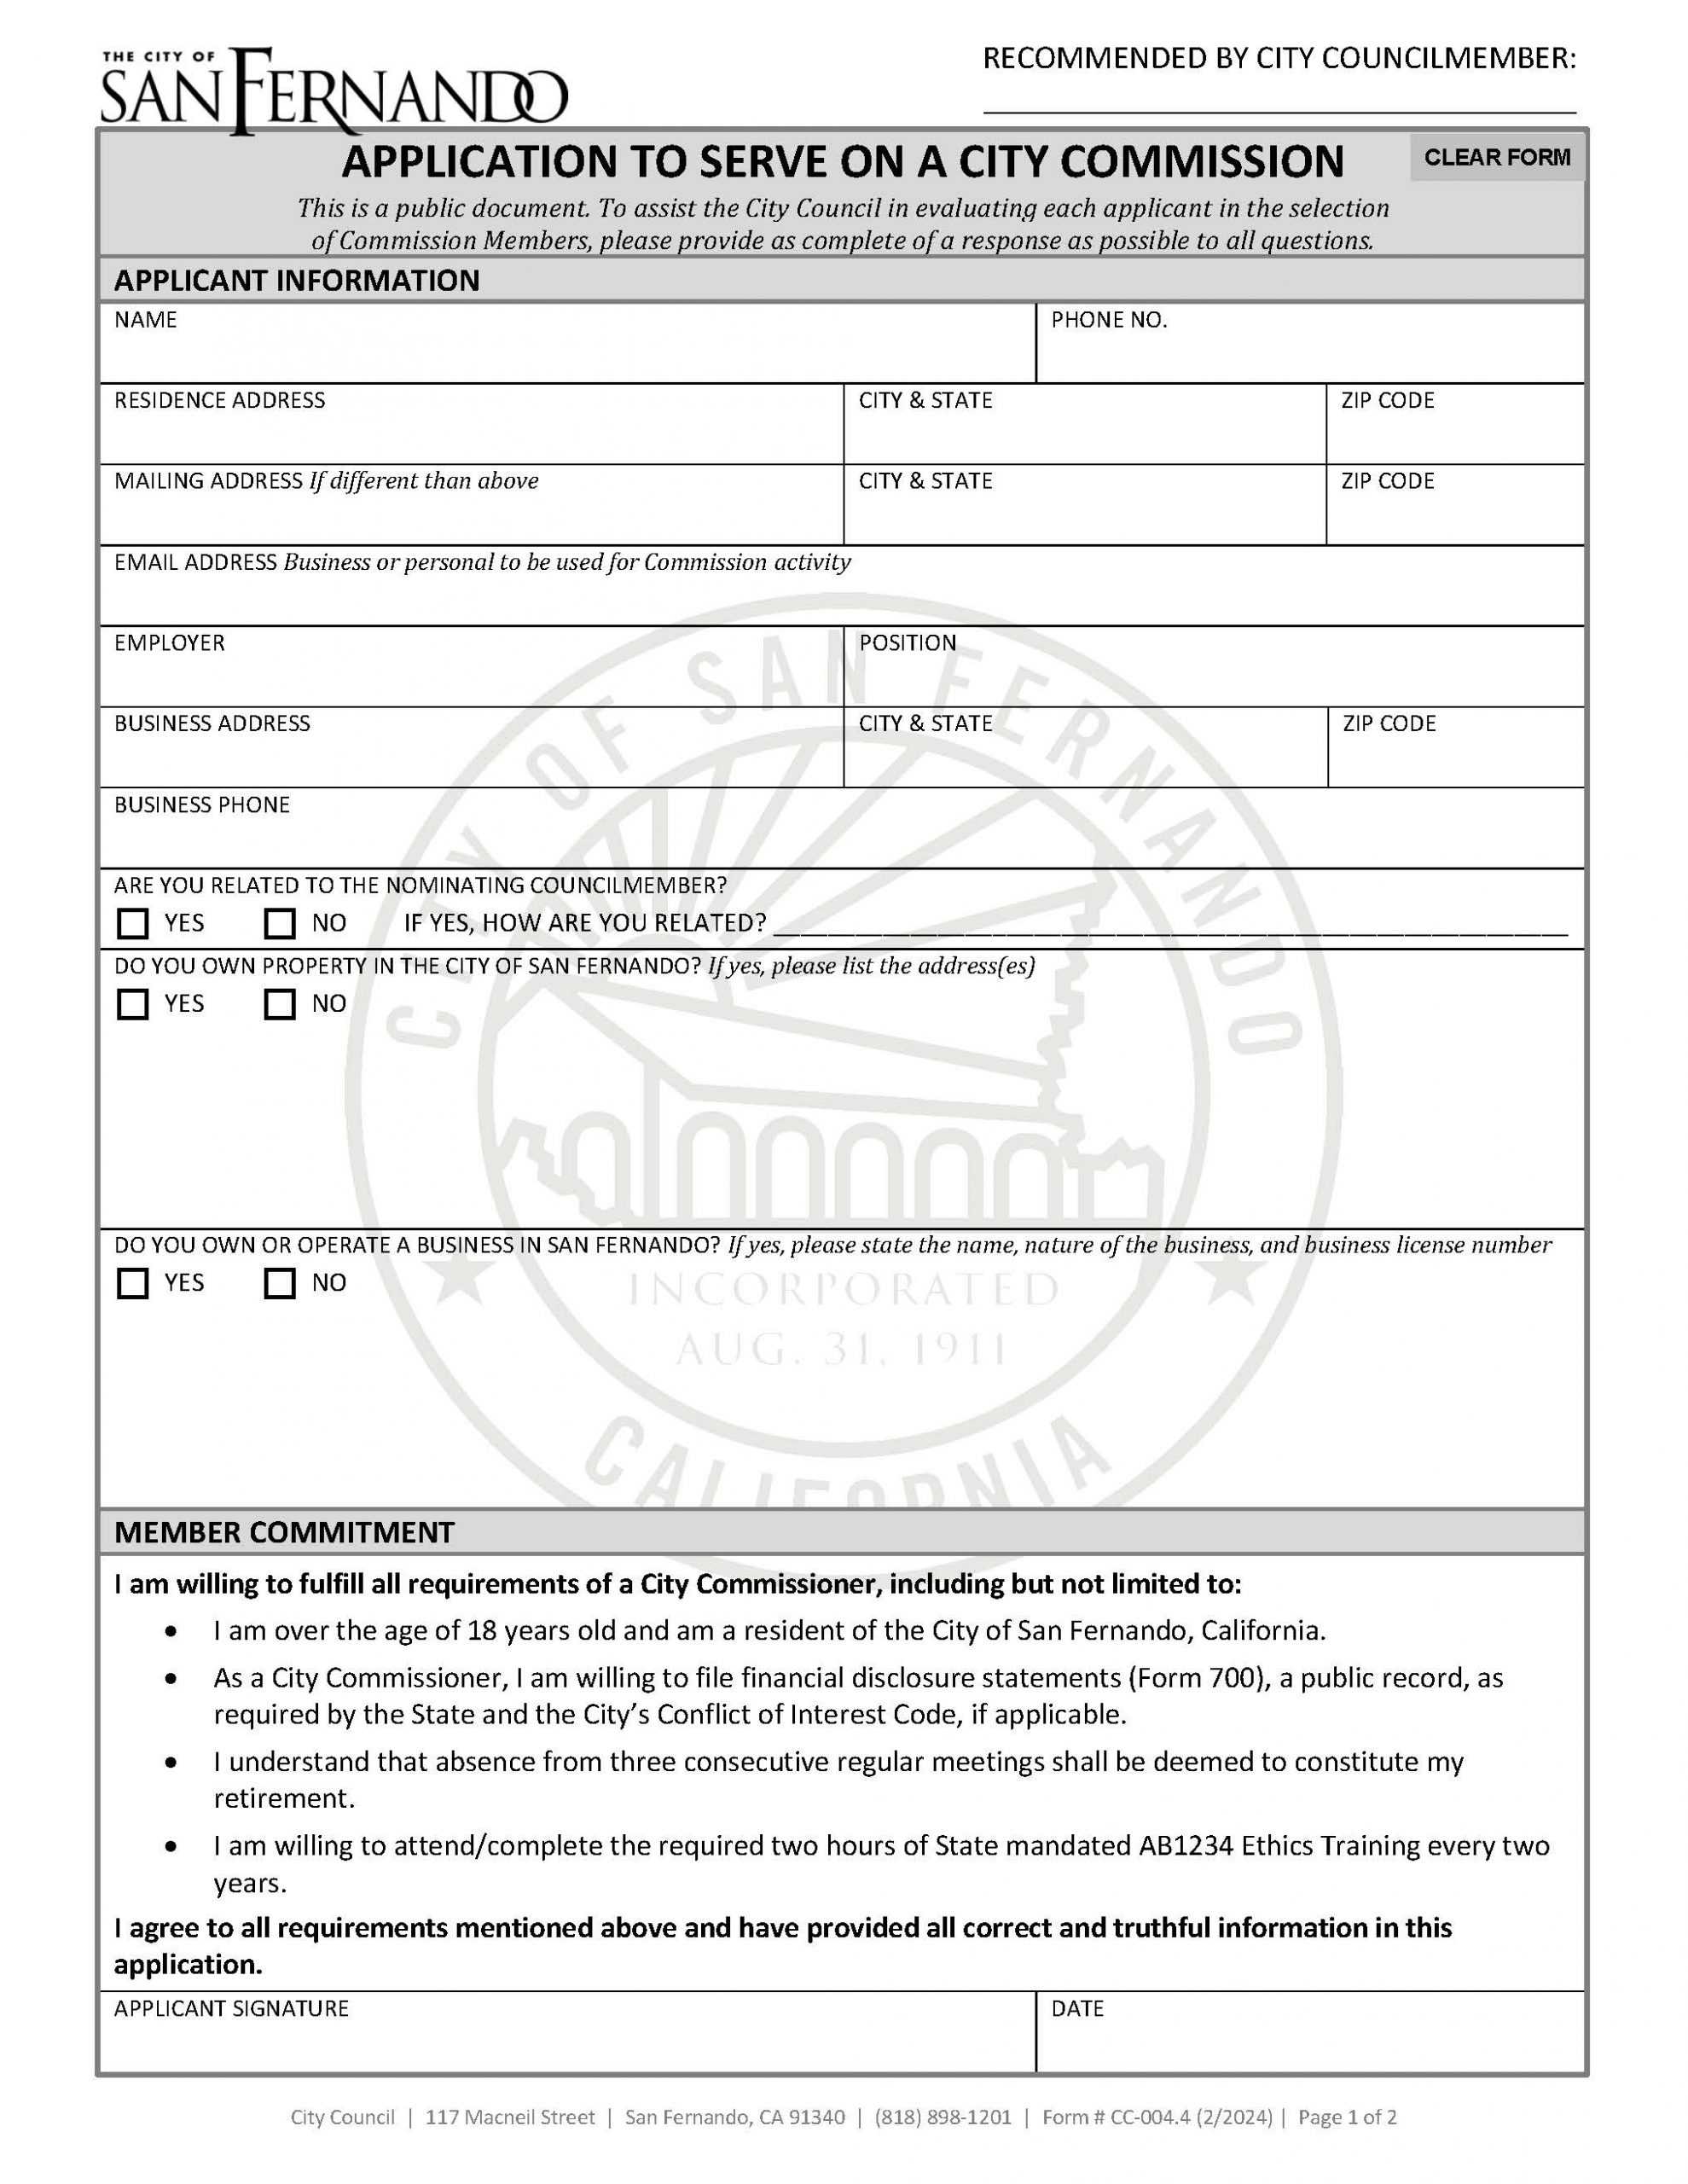 CC-004.4 Form Application to Serve on a City Commission (2-2024)